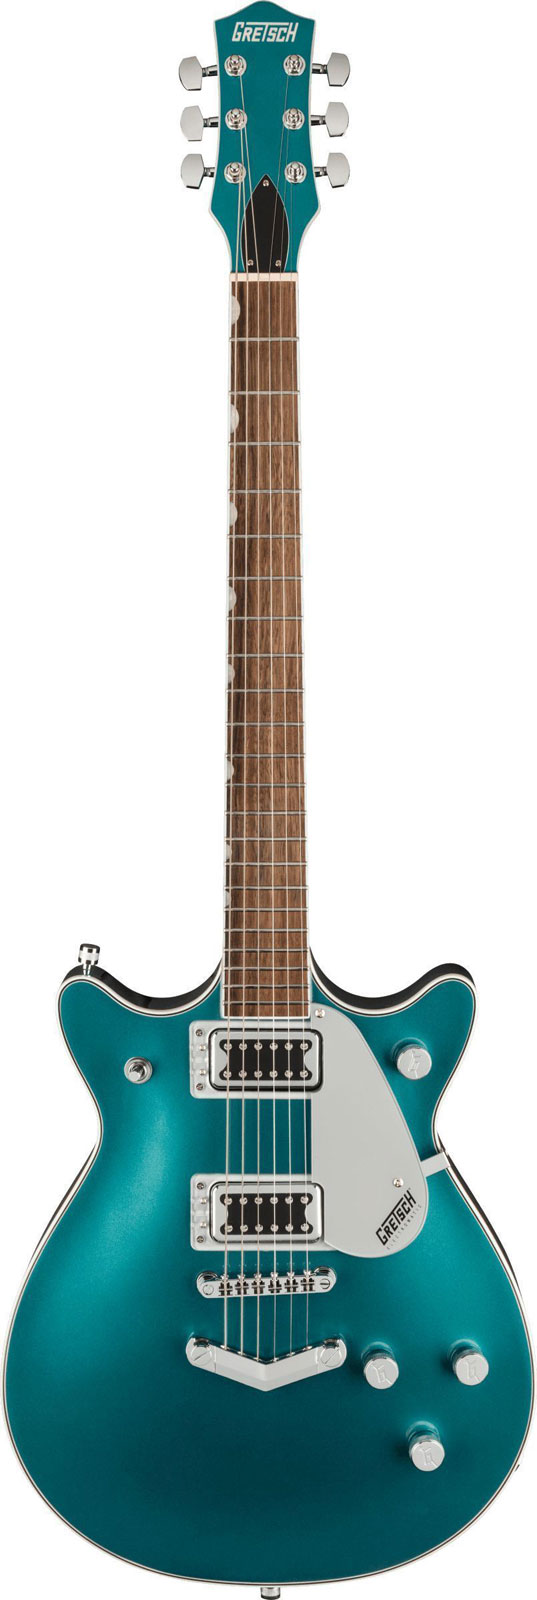 GRETSCH GUITARS G5222 ELECTROMATIC DOUBLE JET BT WITH V-STOPTAIL IL OCEAN TURQUOISE